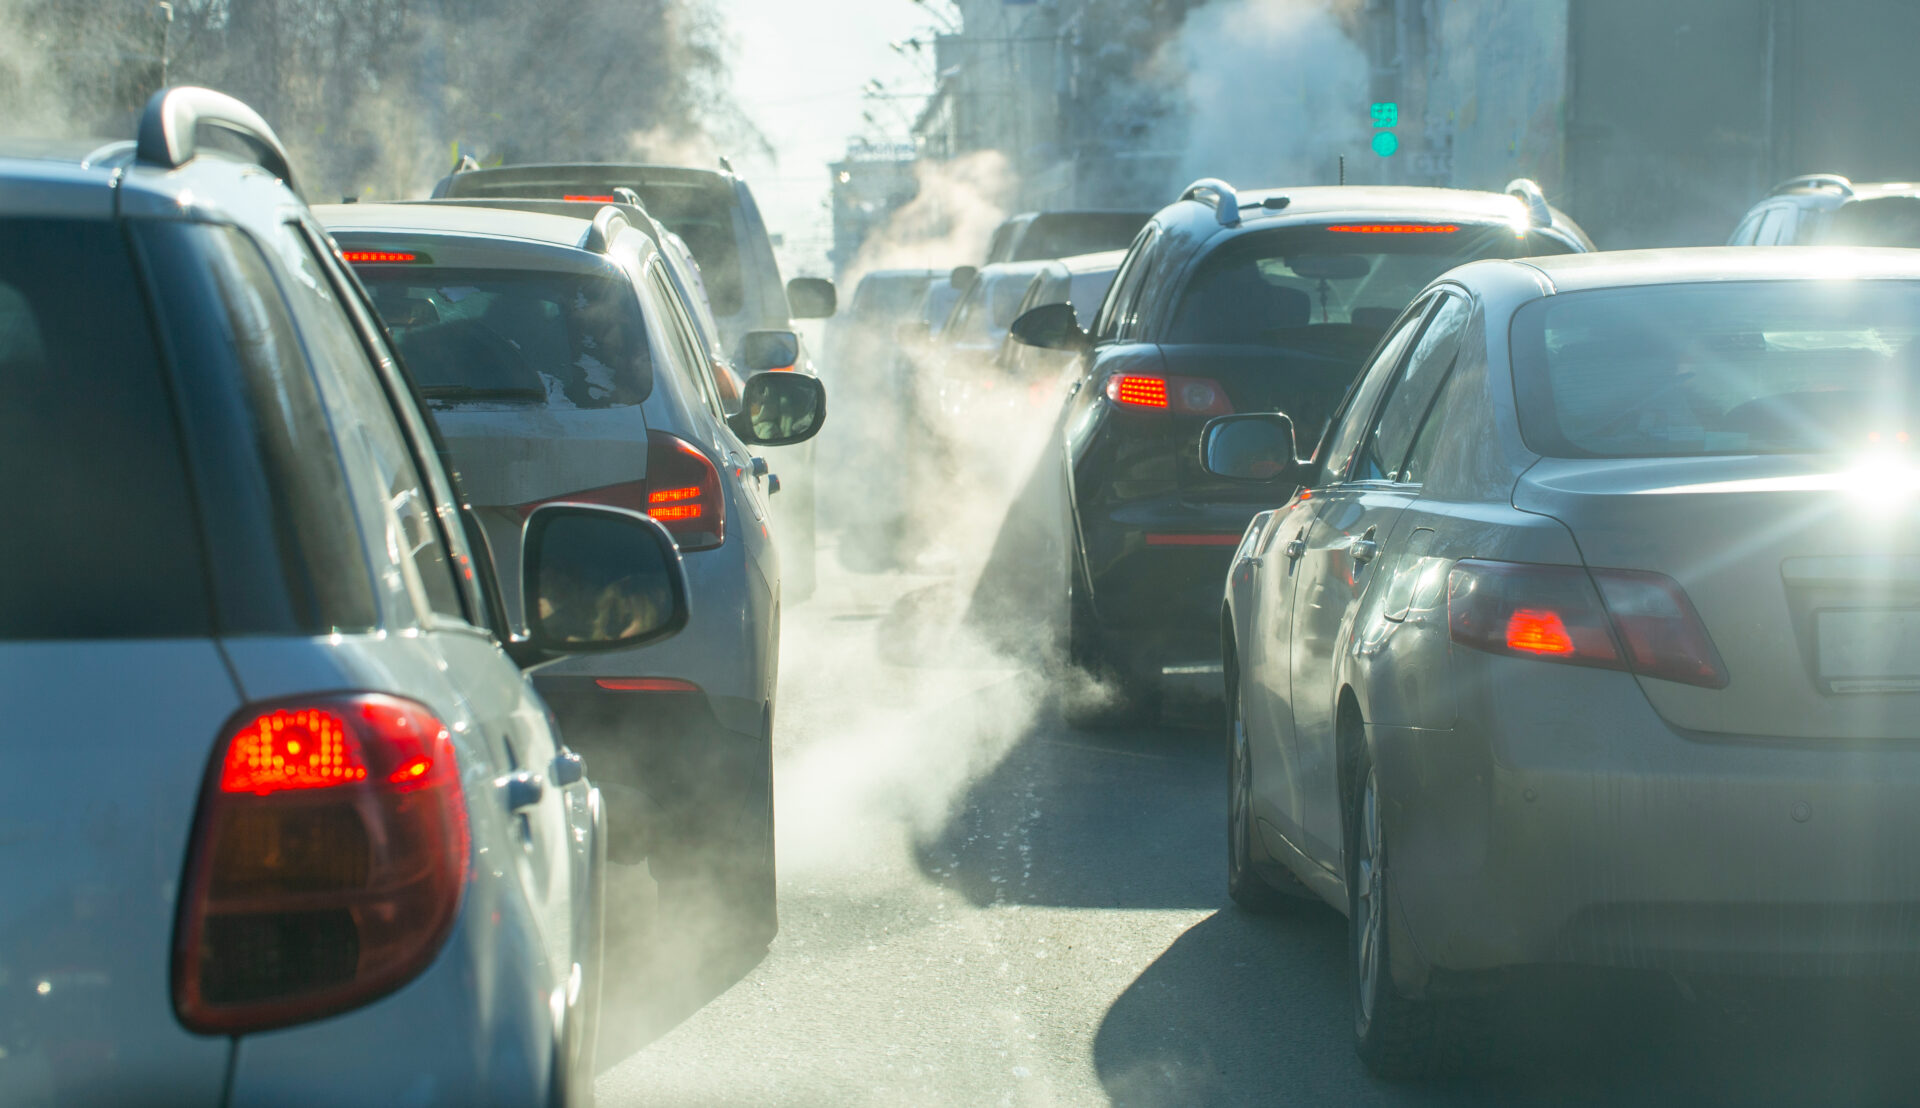 Exhaust from cars fills the frame on a cold winter morning. Silver and white cars are lined up in traffic, idling.